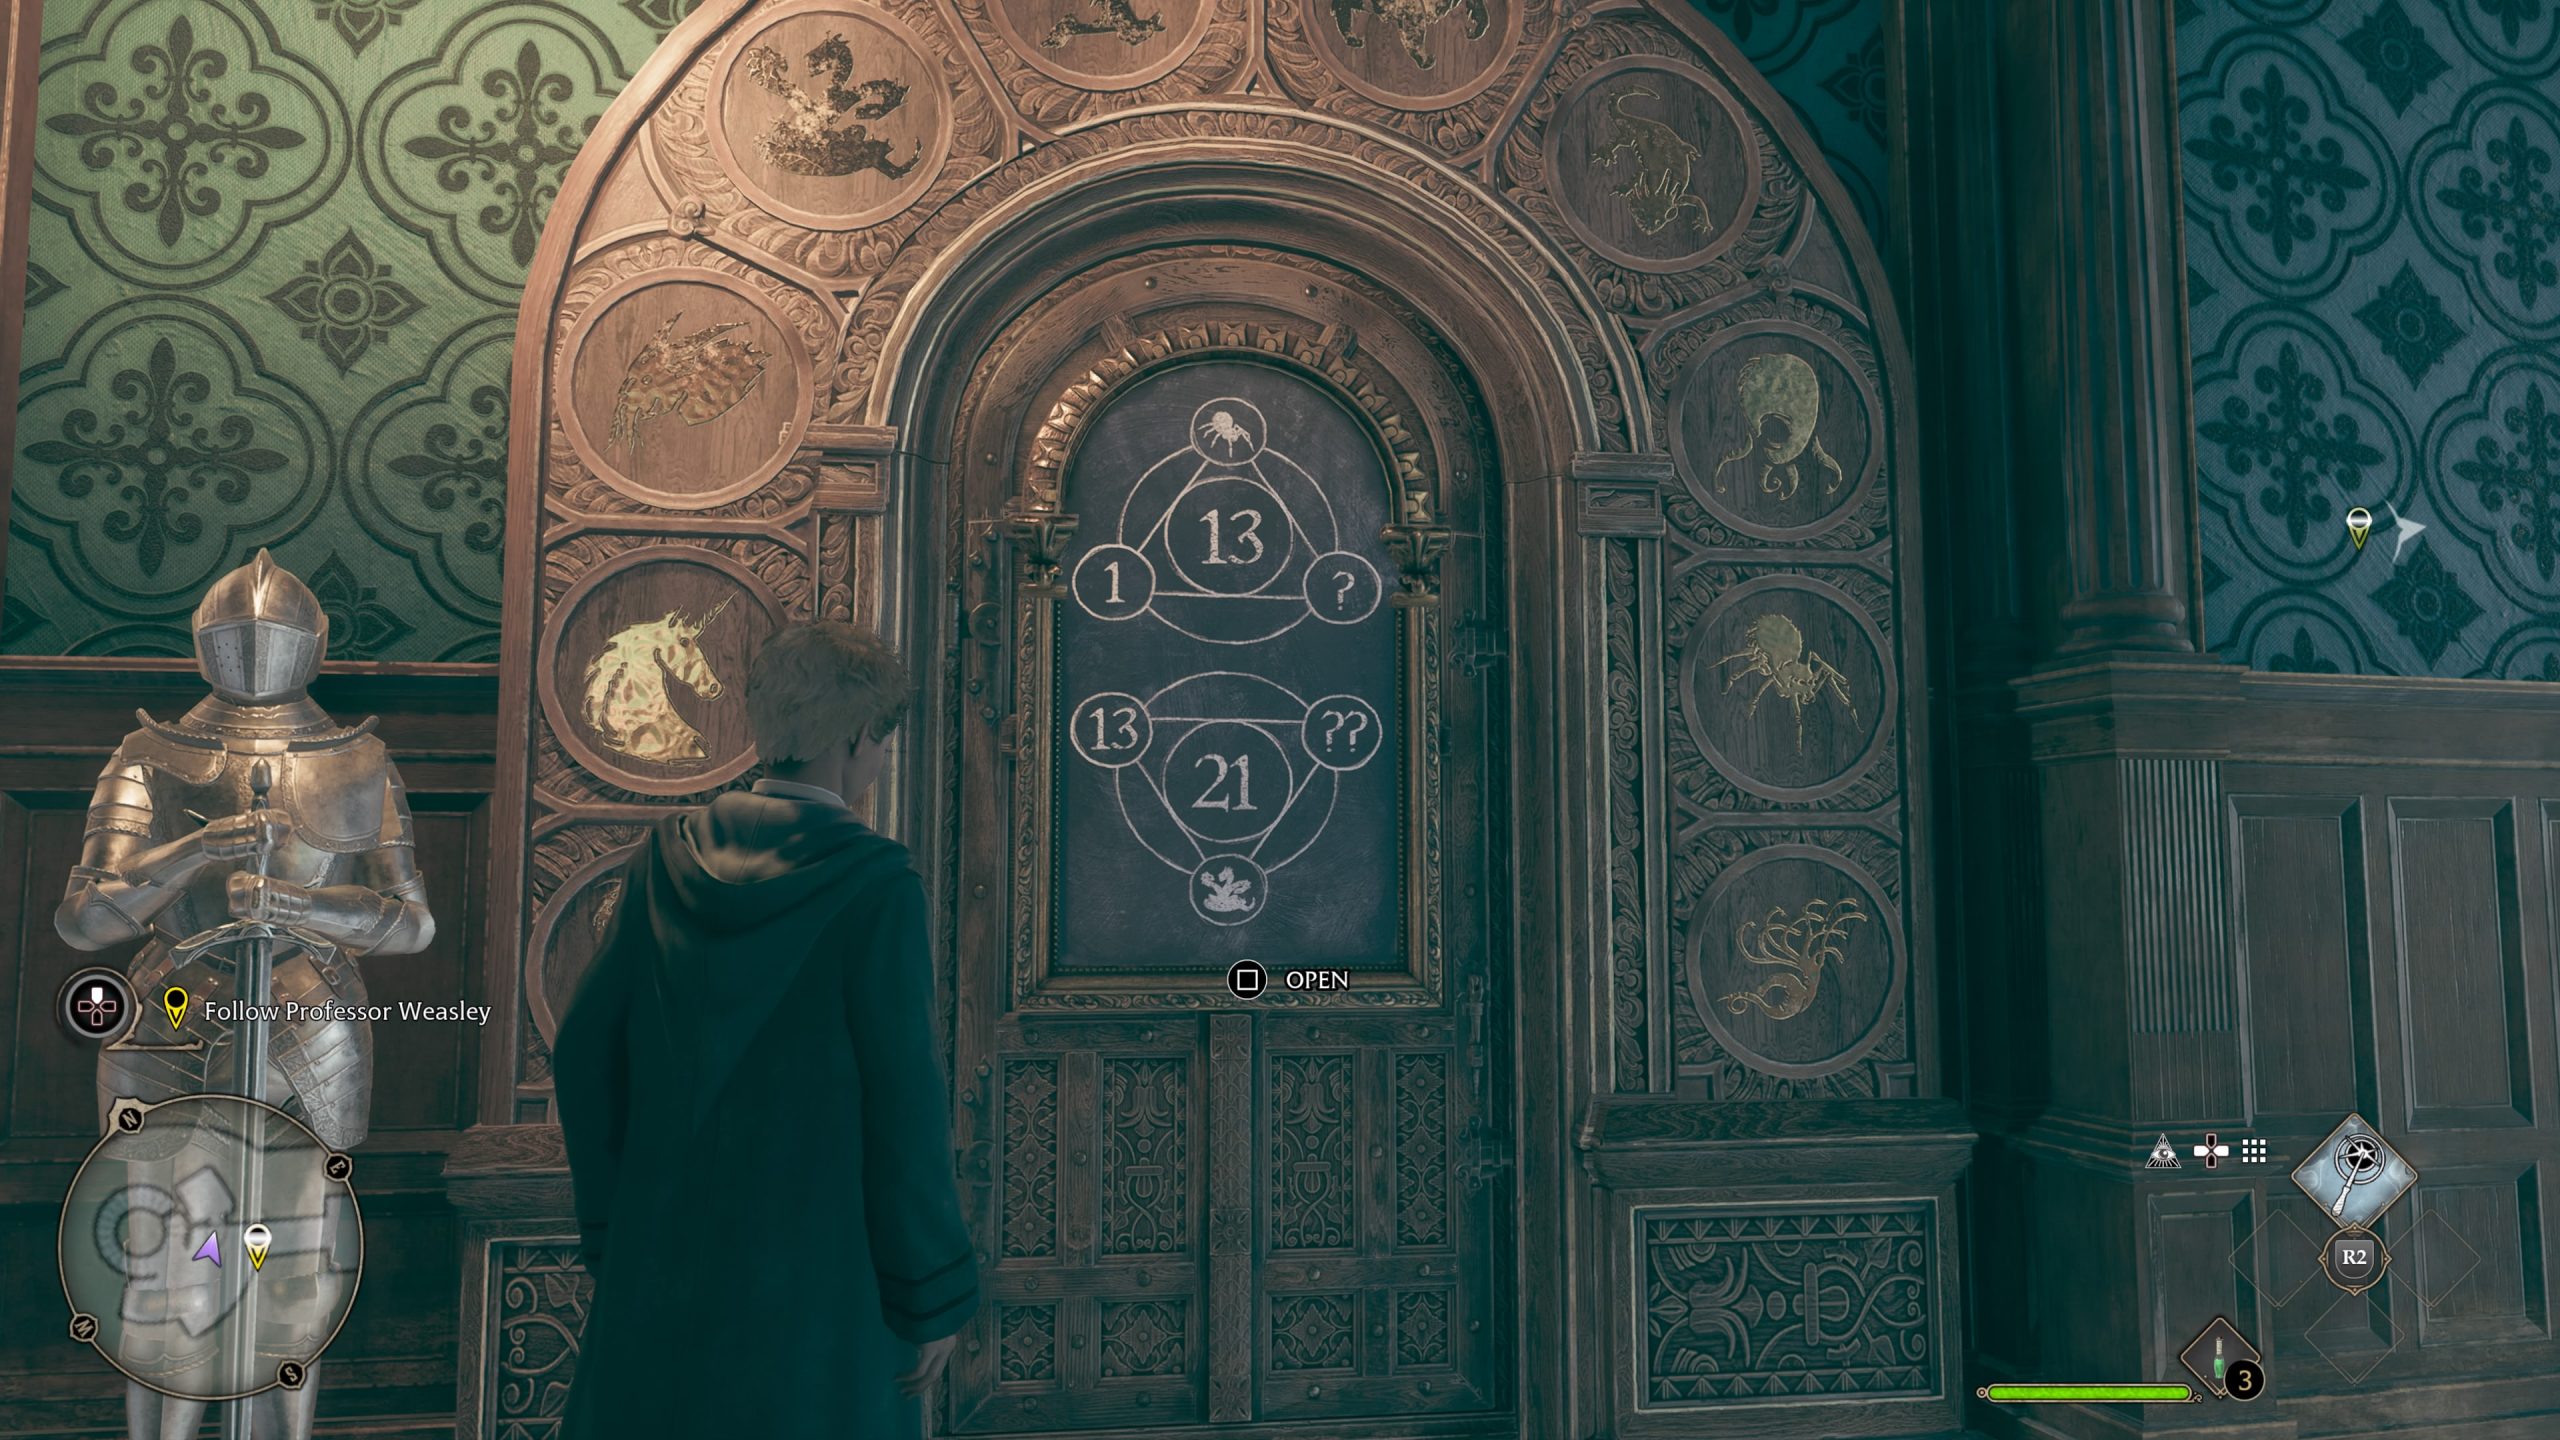 Hogwarts Legacy door puzzles and how to solve them